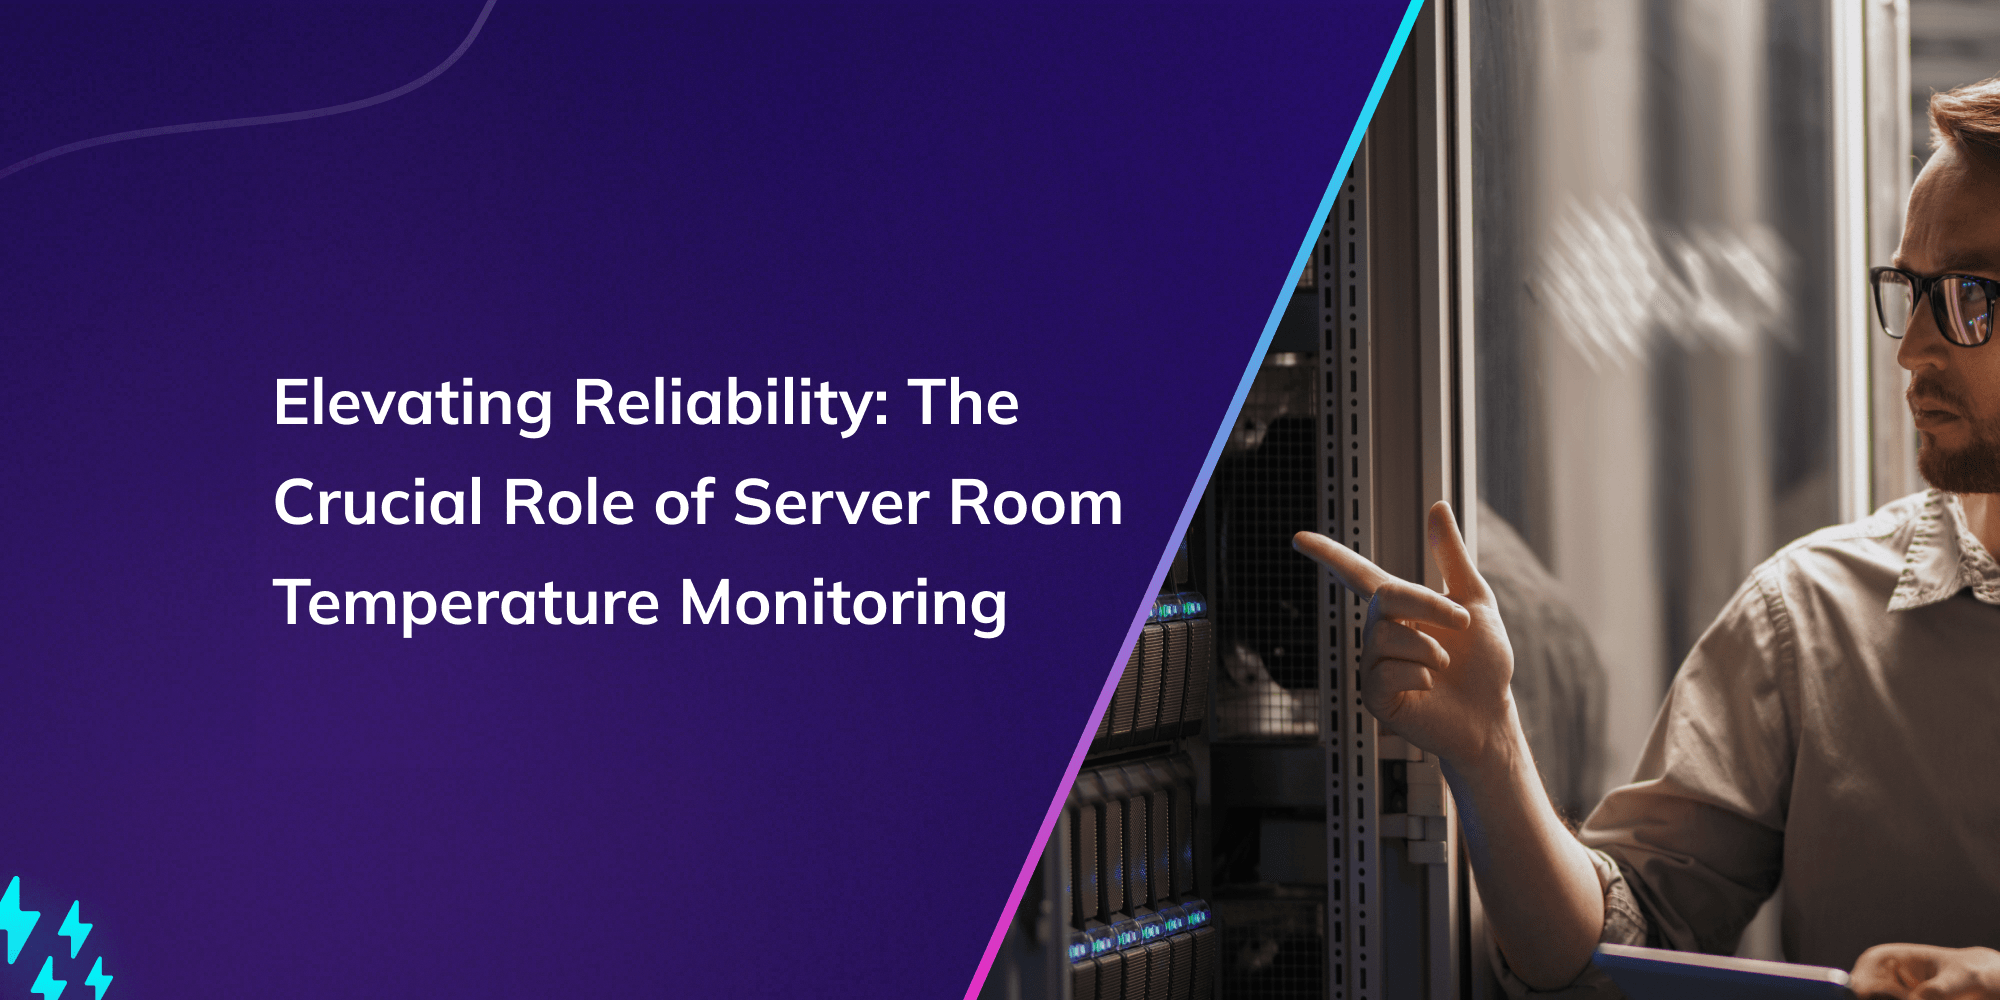 Elevating Reliability: The Crucial Role of Server Room Temperature Monitoring